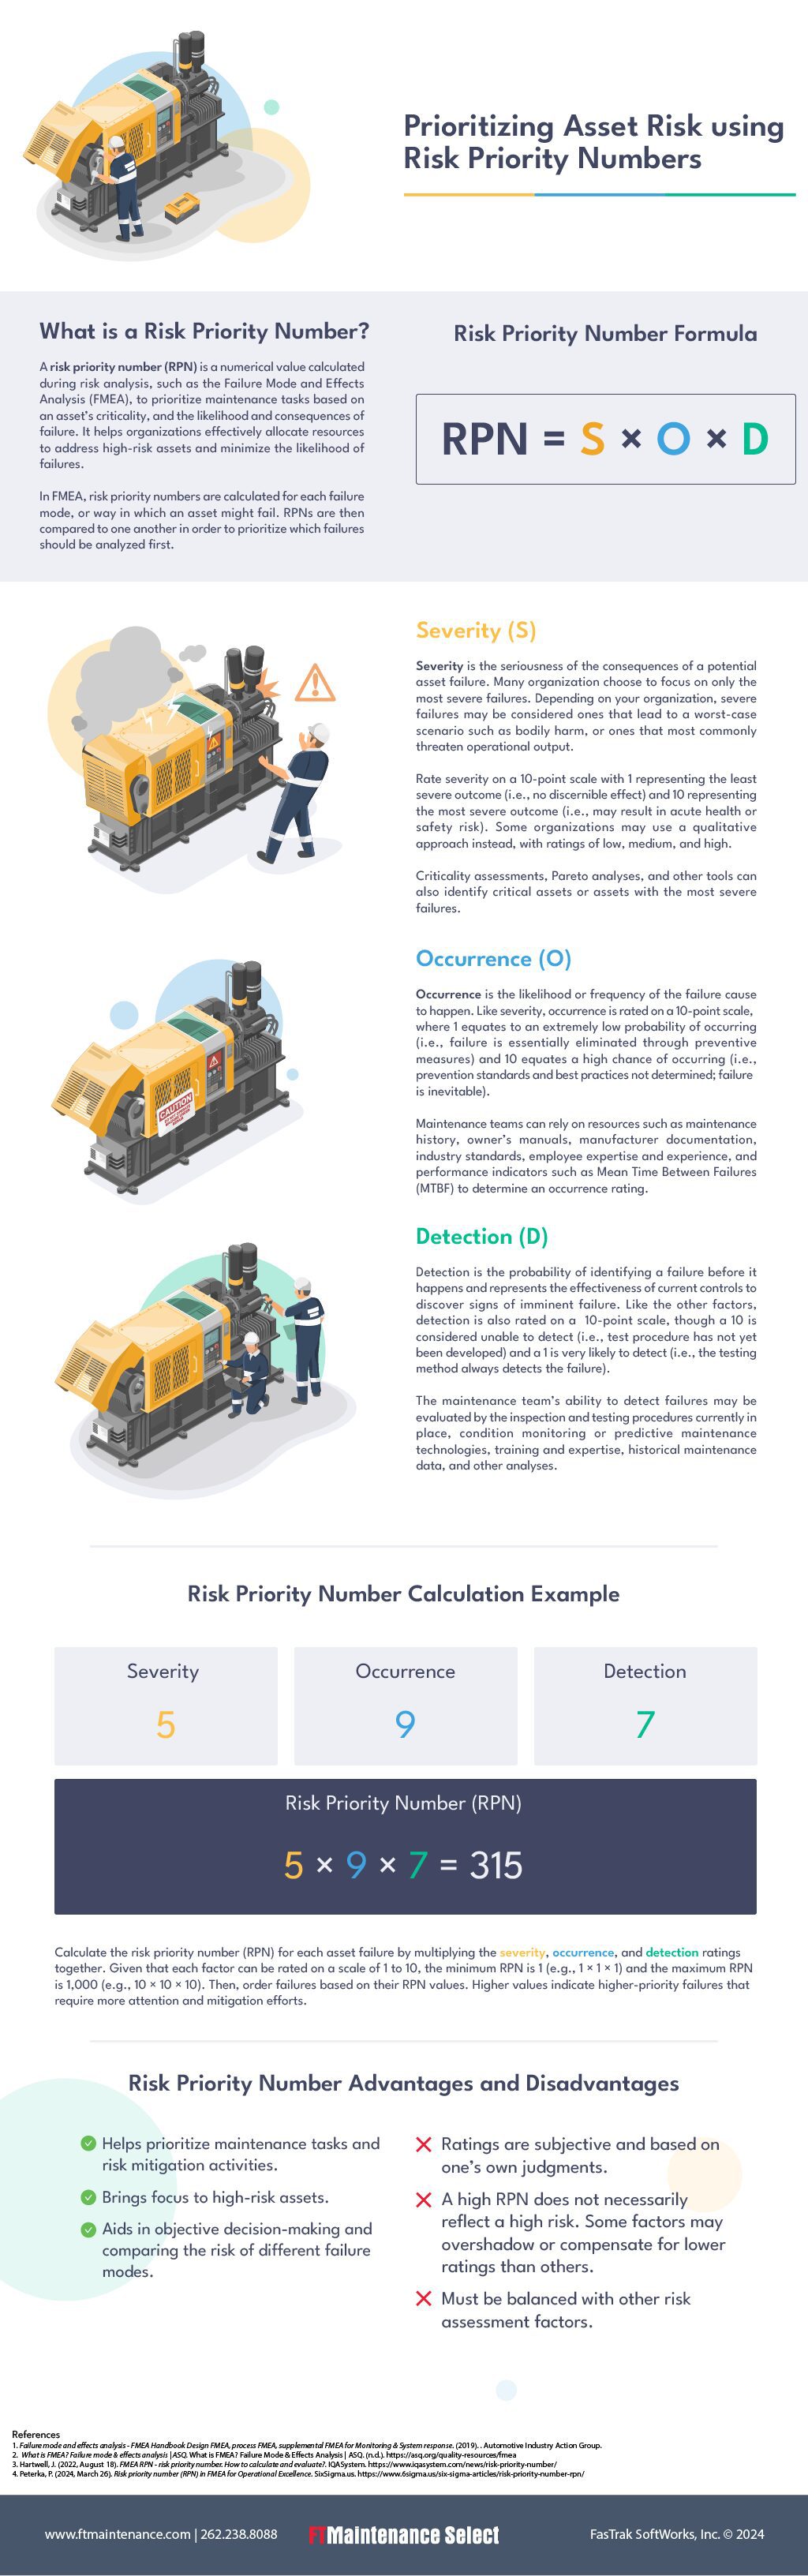 Infographic demonstrating how to calculate risk priority number